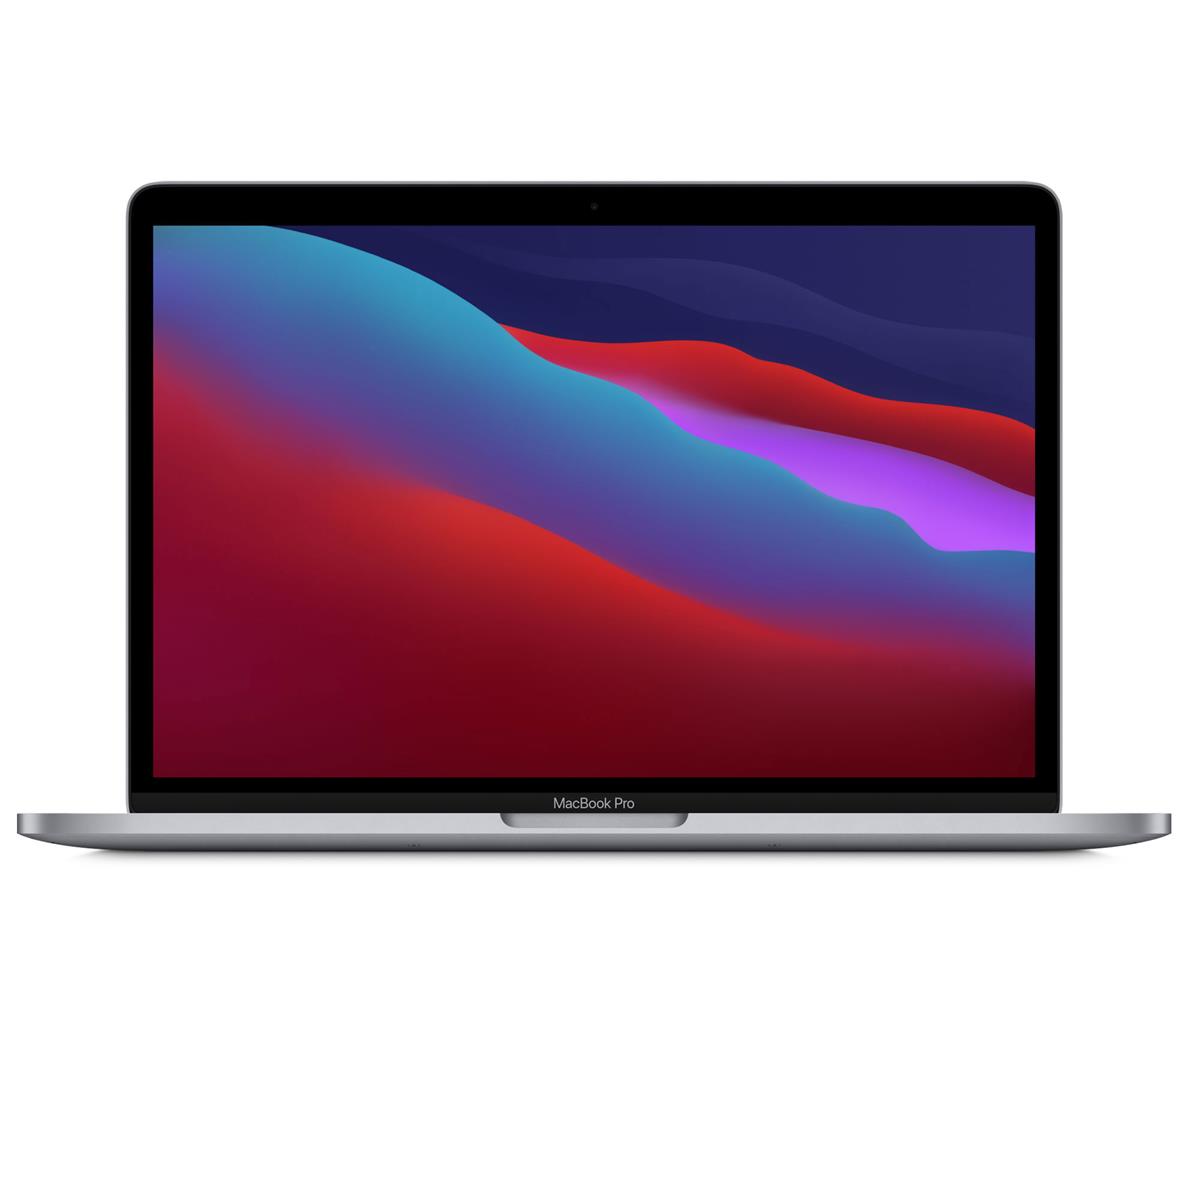 Apple Macbook Pro 13.3" M1 Chip with 8‑Core CPU and 8‑Core GPU, 8GB Memory, 256GB SSD, Space Gray, Late 2020